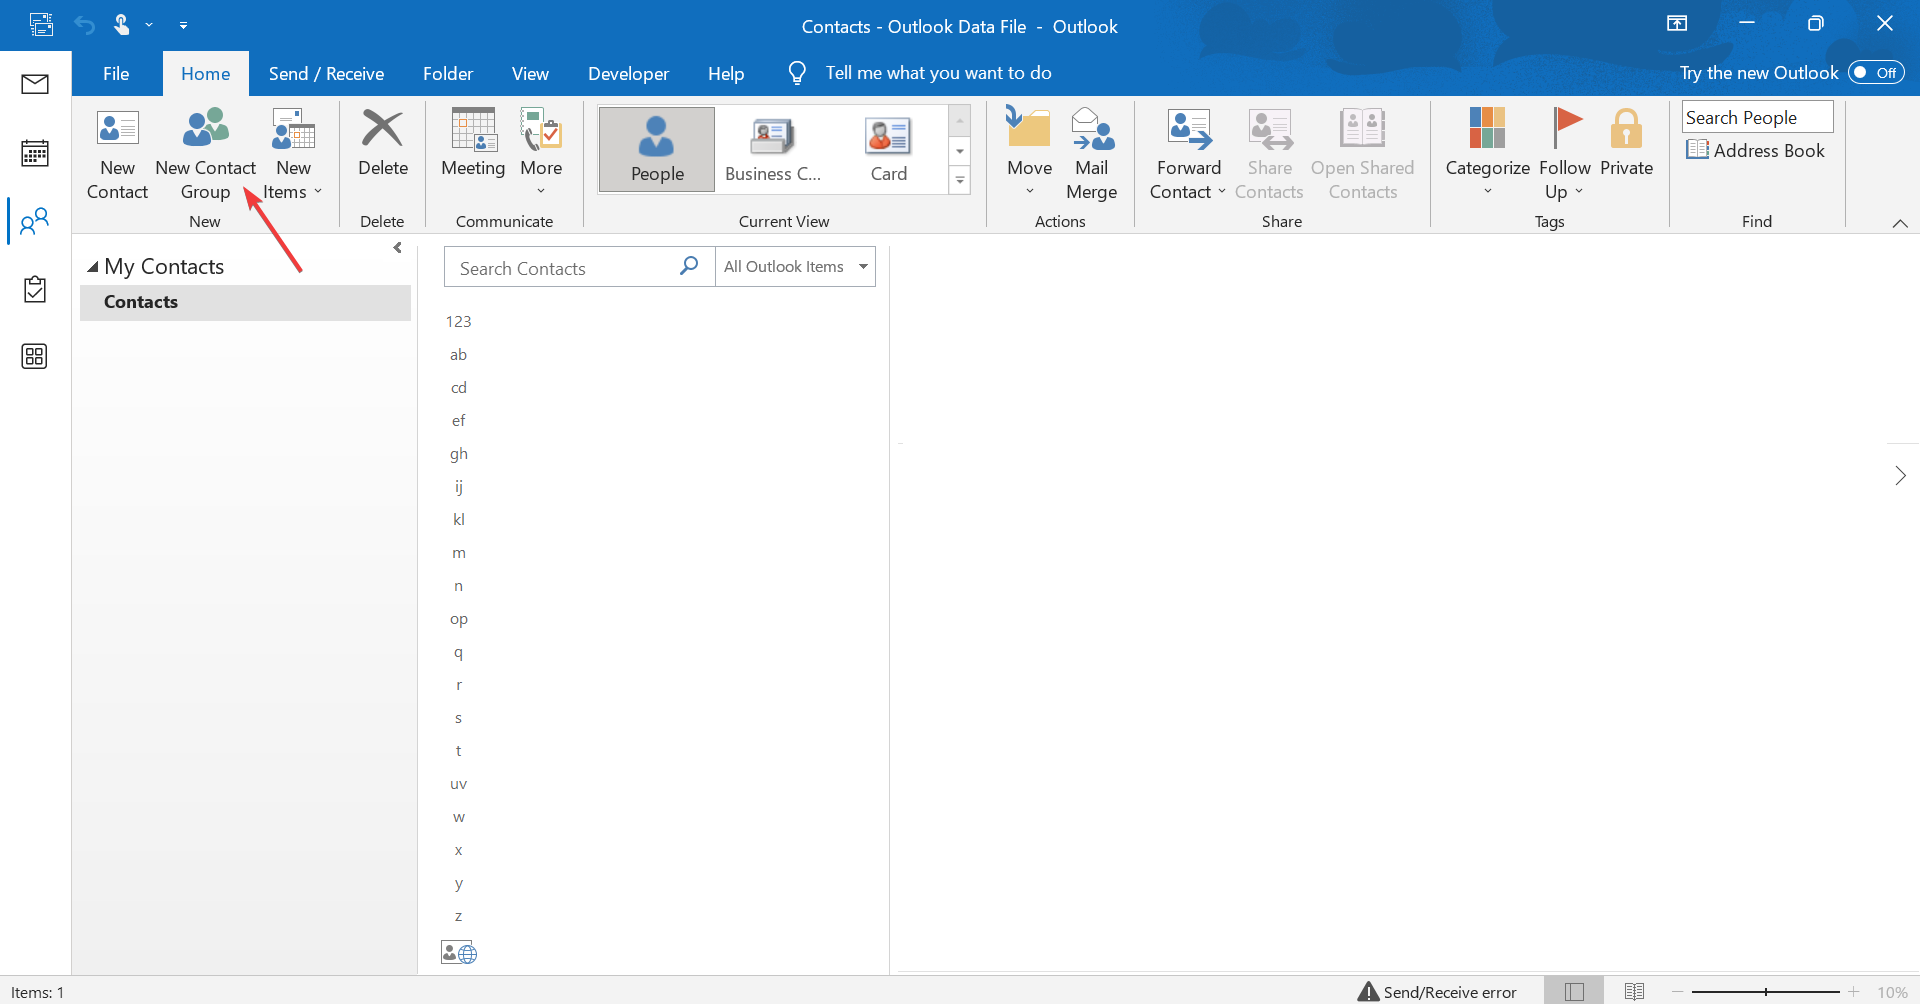 new contact group to create group email in outlook